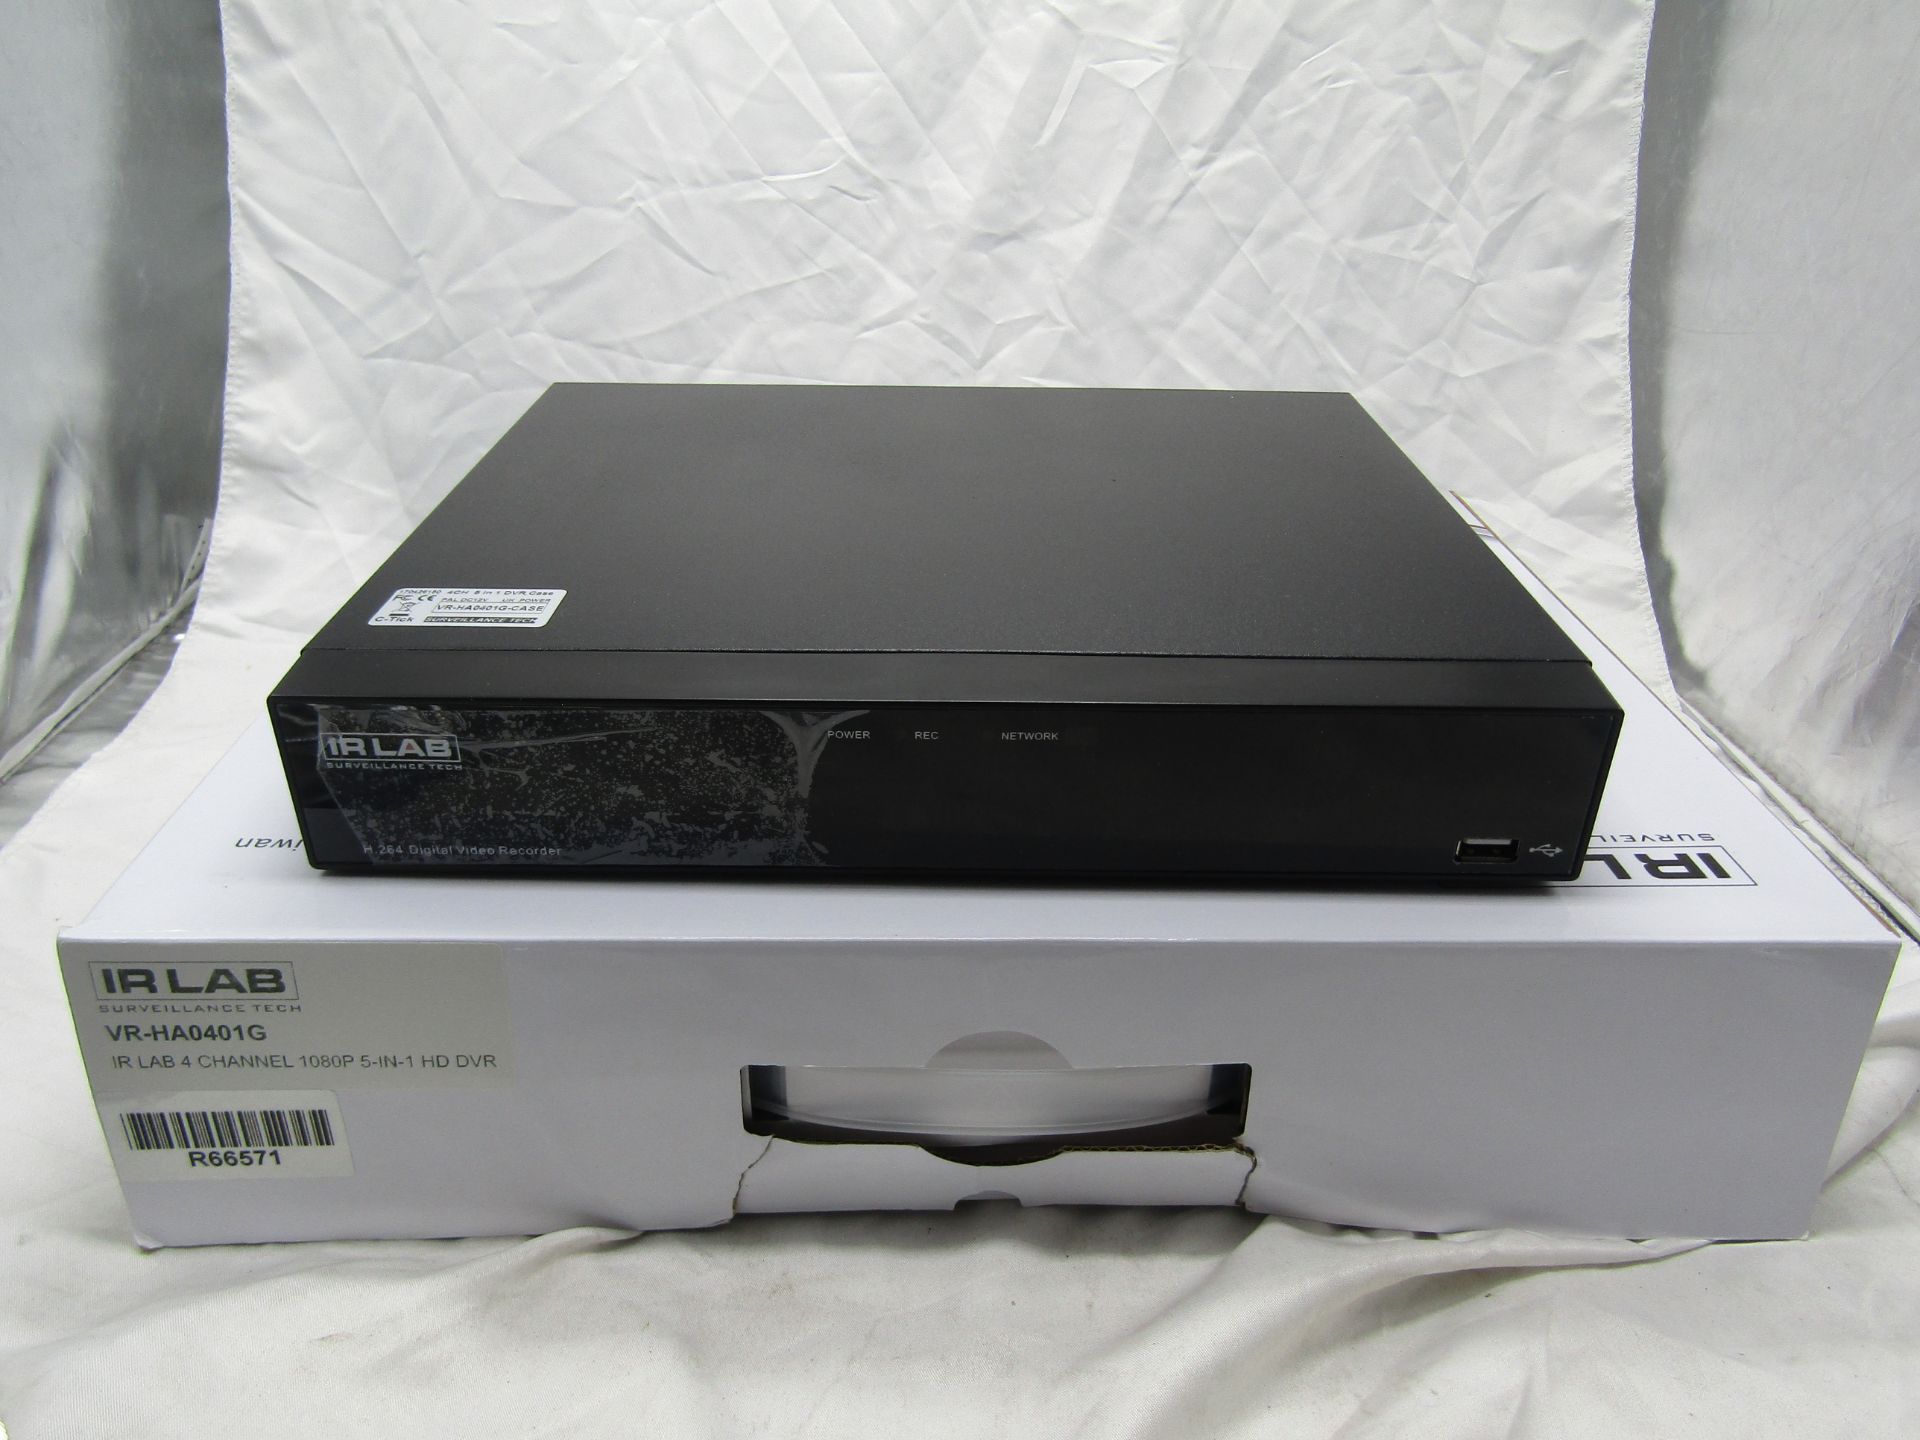 one lot of over 200 items of CCTV and Surveillance equipment, includes DVRs, Cameras, Thermal - Image 4 of 104